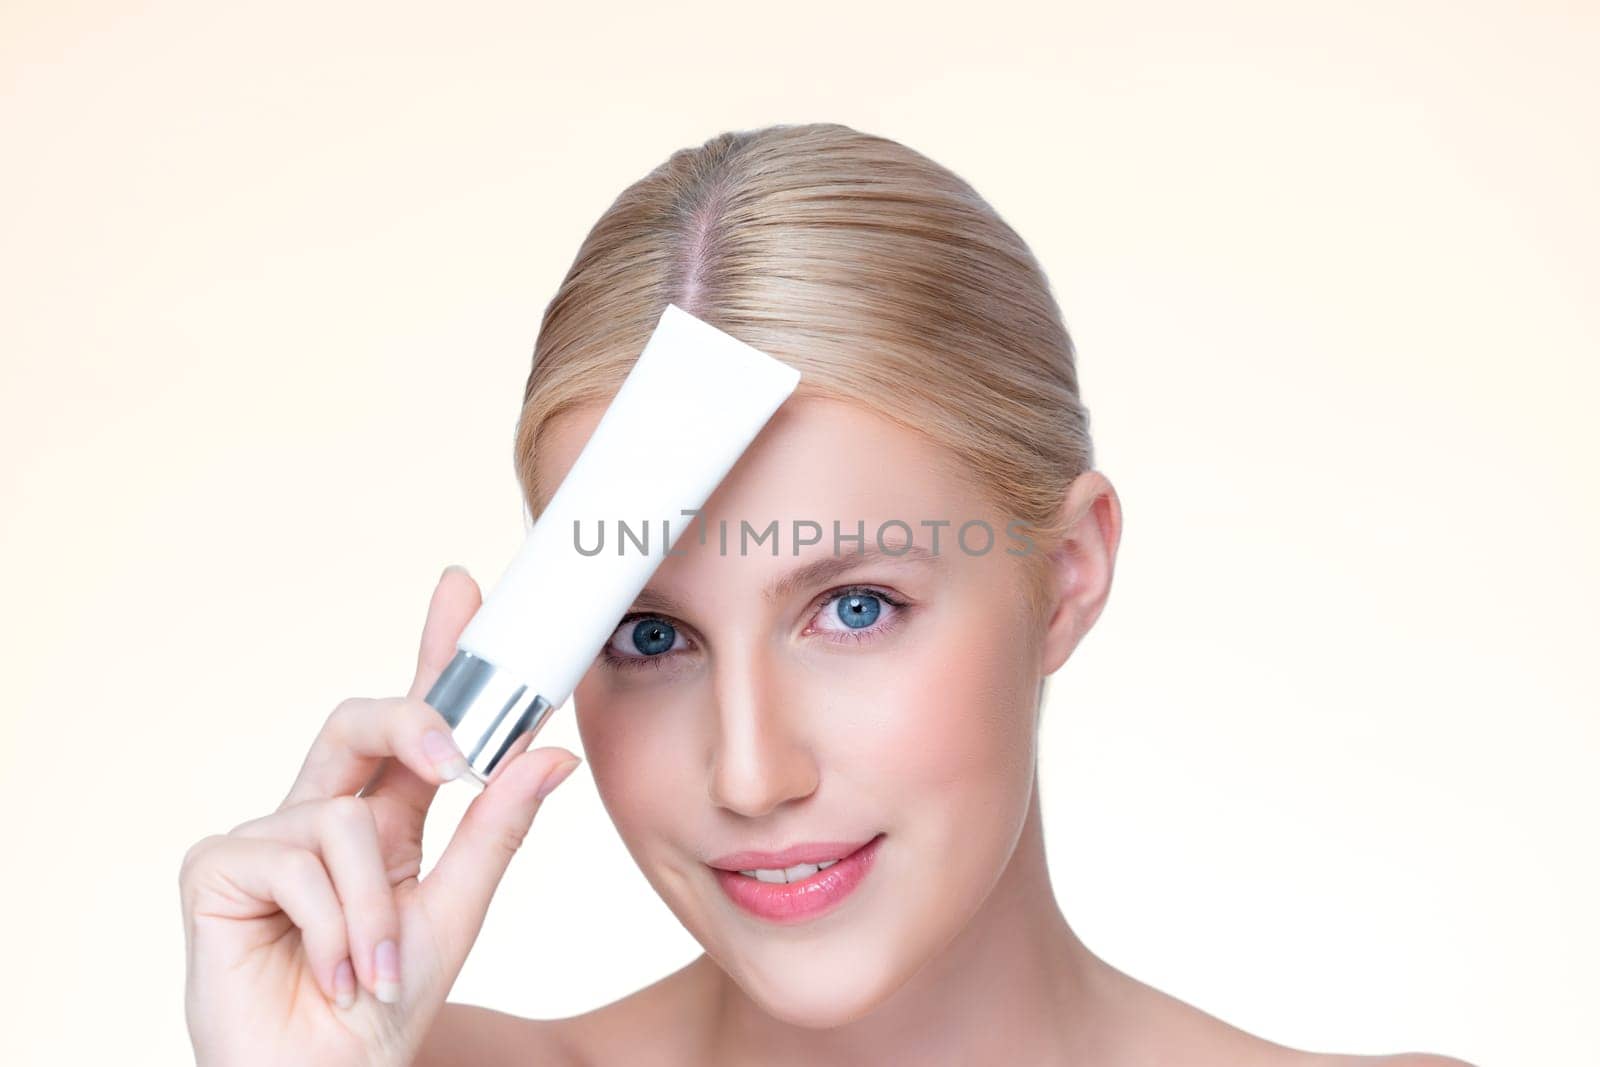 Closeup personable beautiful perfect natural skin woman hold mockup tube moisturizer cream for skincare treatment product advertising expressive facial and gesture expression in isolated background.